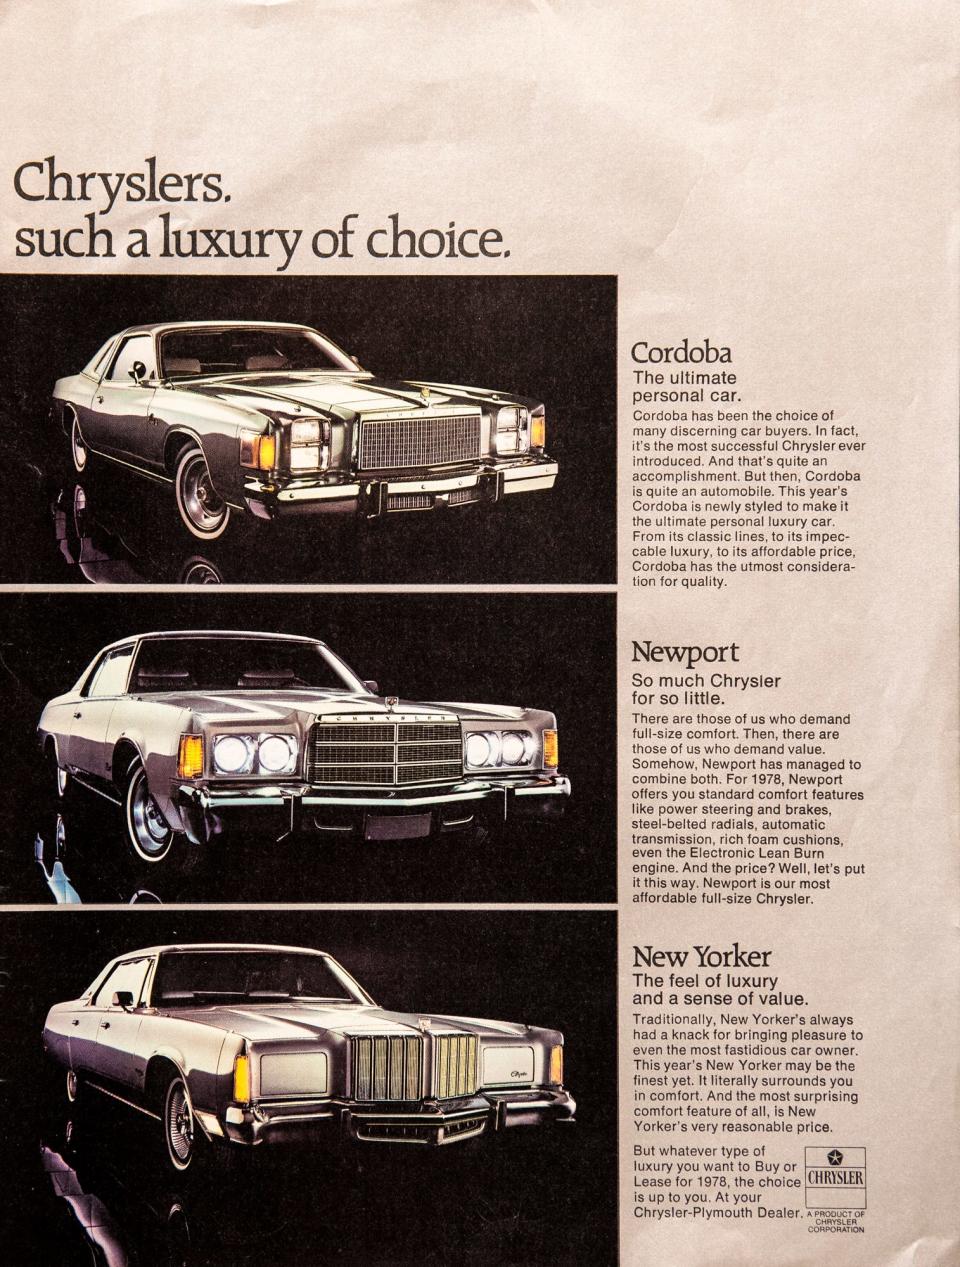 A magaine ad showcasing "luxury" Chrylers of four decades ago: the Cordoba, the Newport and the top-of-the line New Yorker.